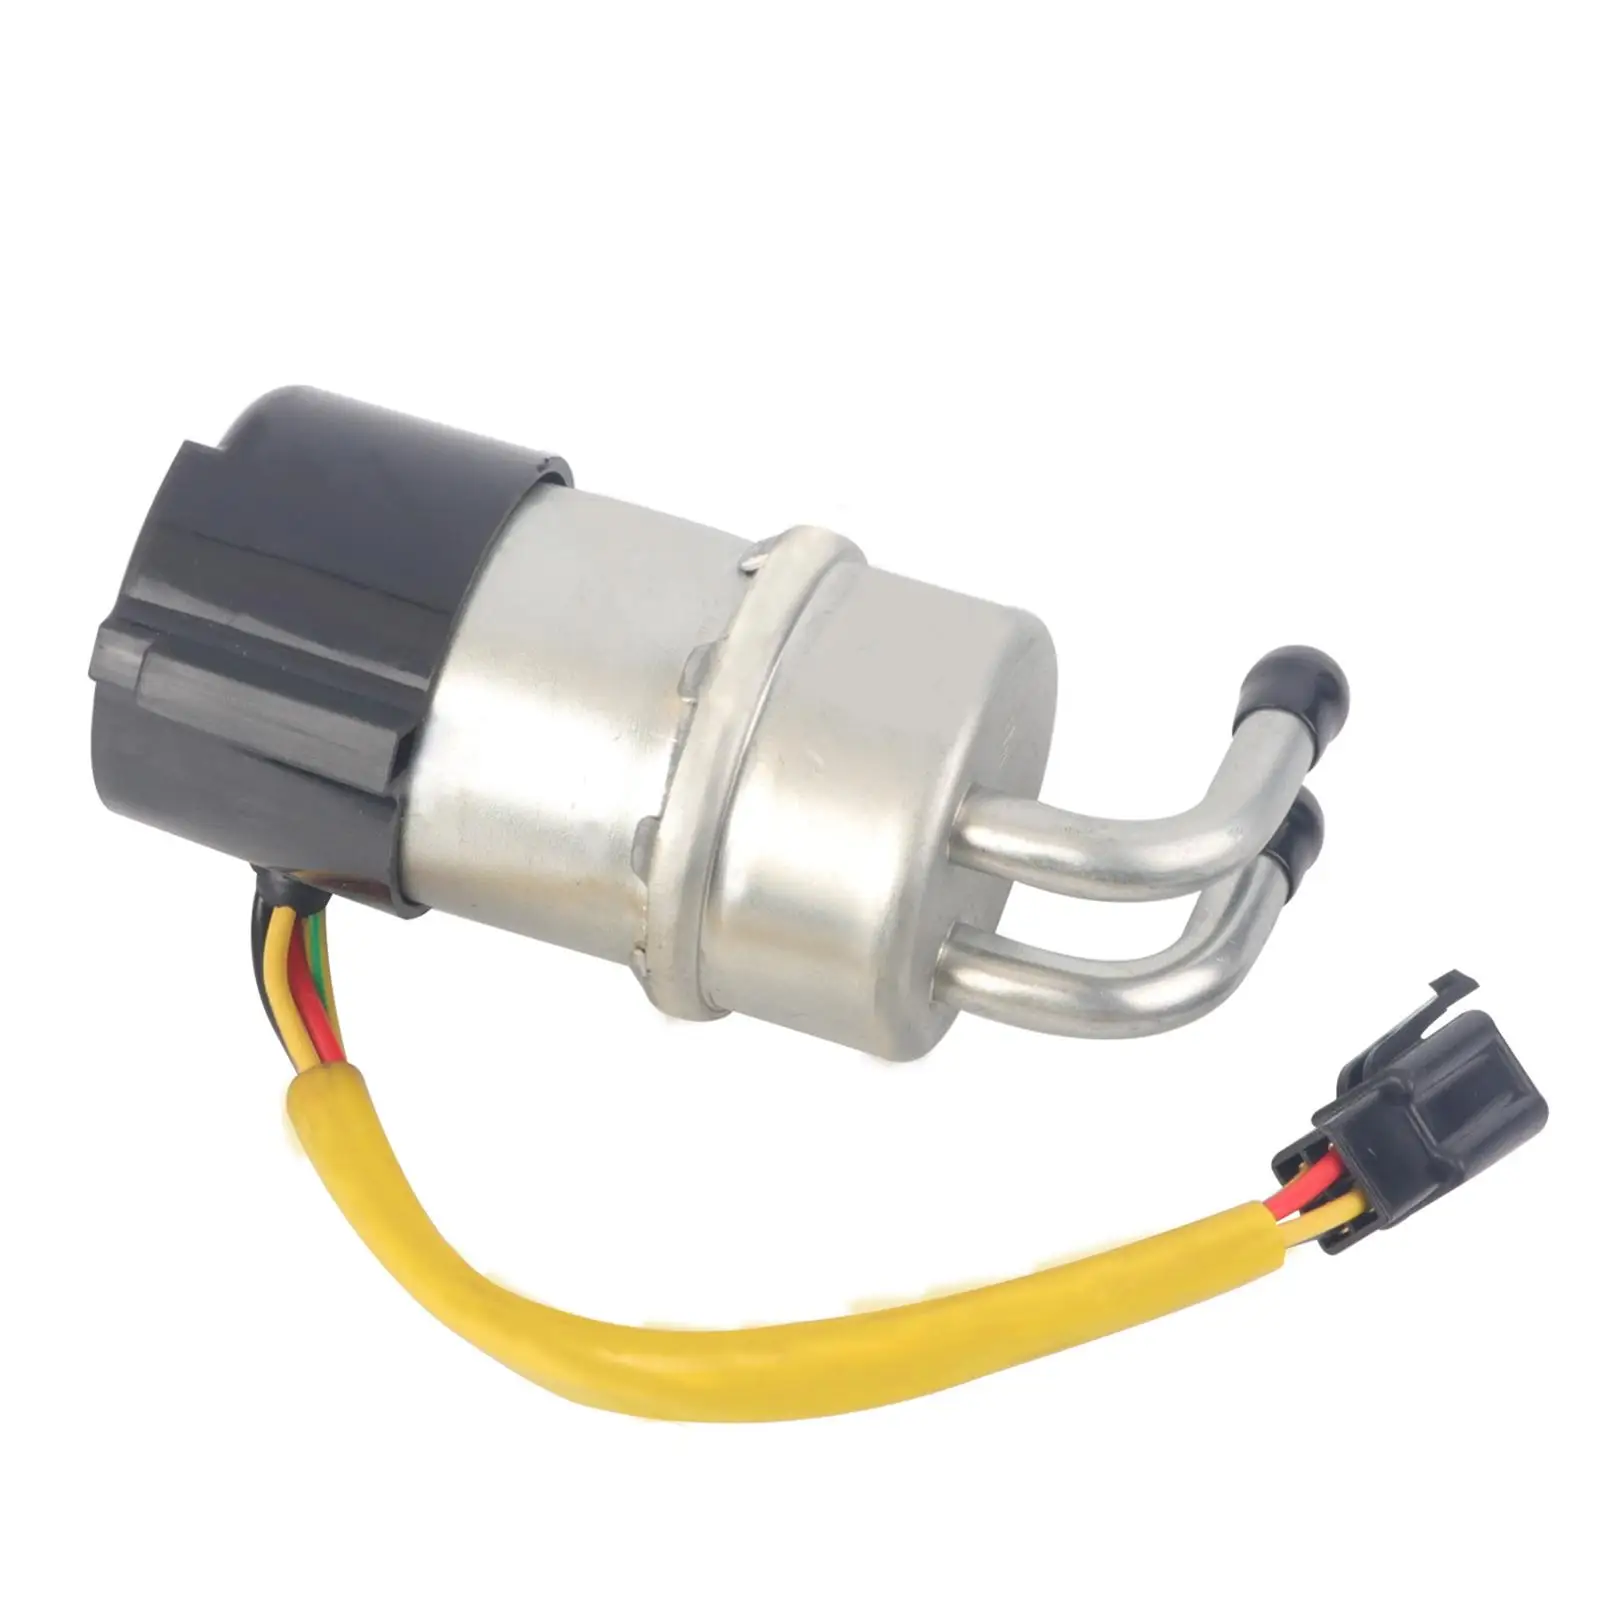 Motorcycle Fuel Pump Assembly, for Suzuki VS700 VS800 Intruder 1986-2009 Vehicle Replacement Parts Acc